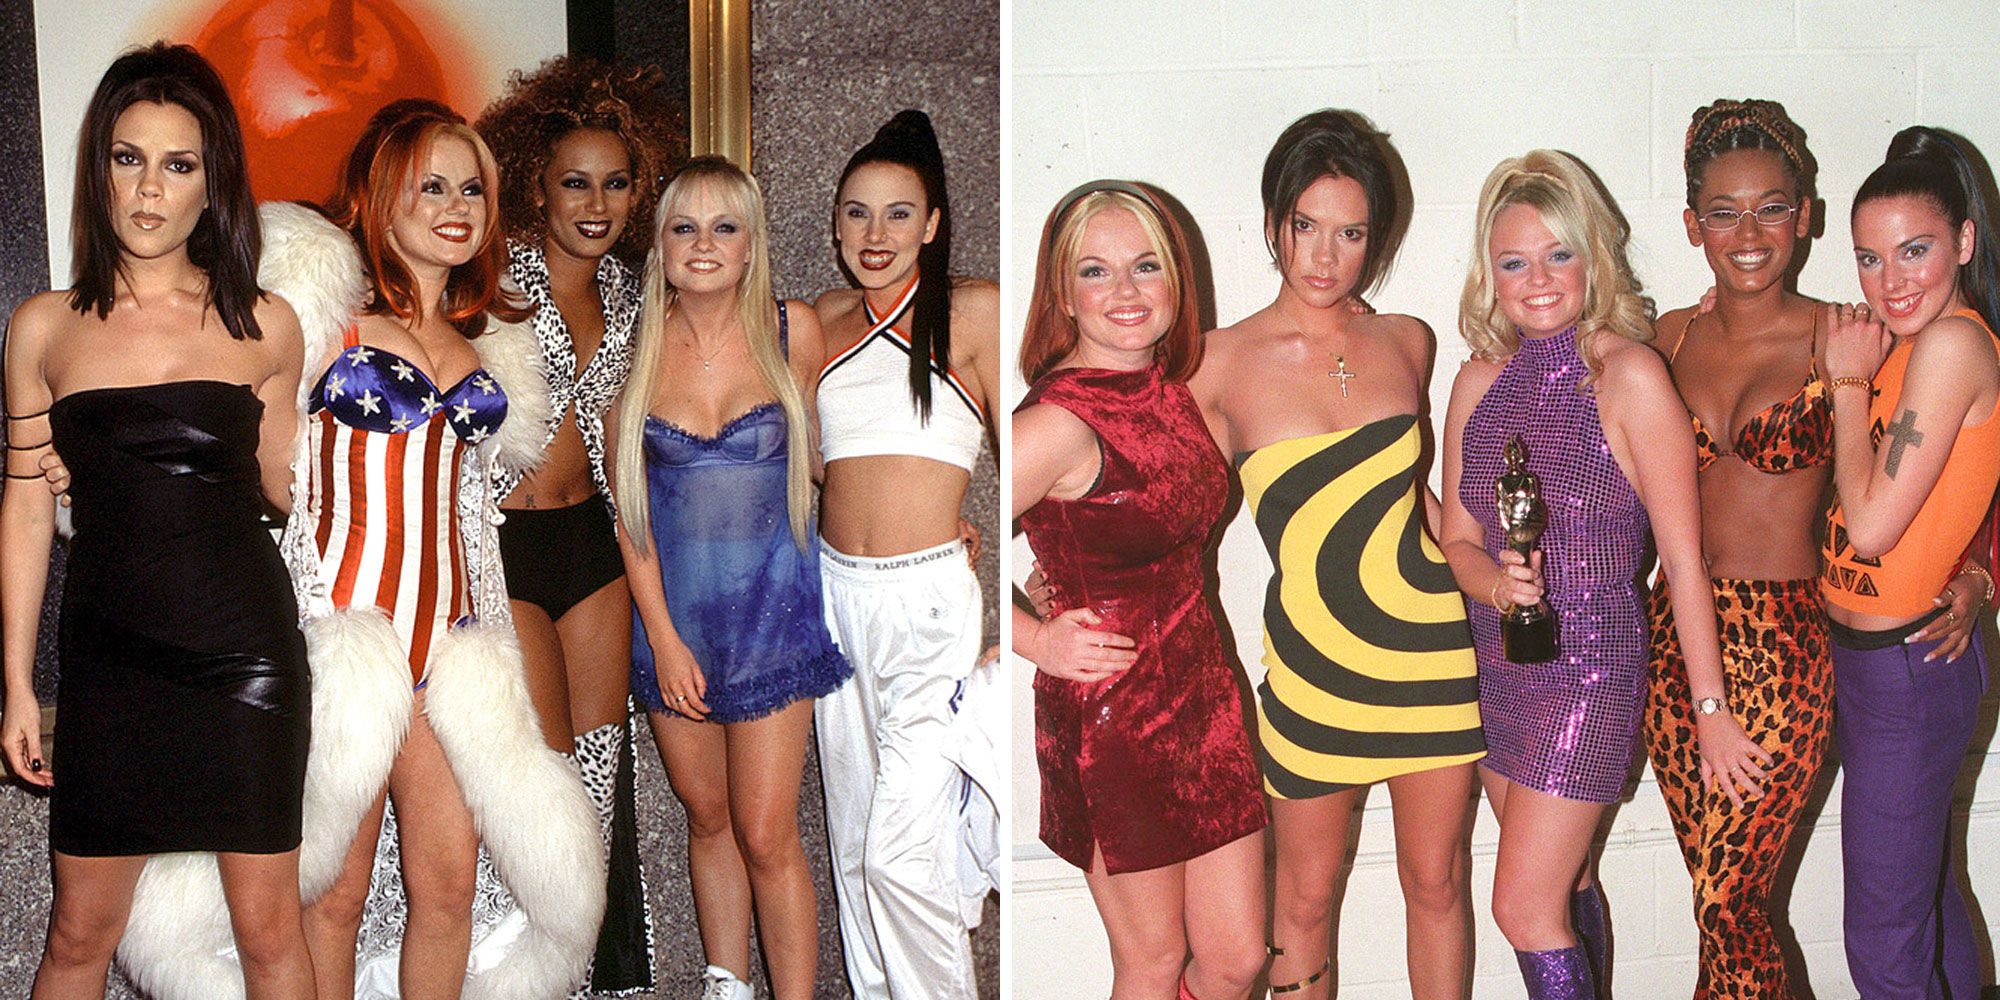 41 Incredible Photos of the Spice Girls' Style - Spice Girls Best